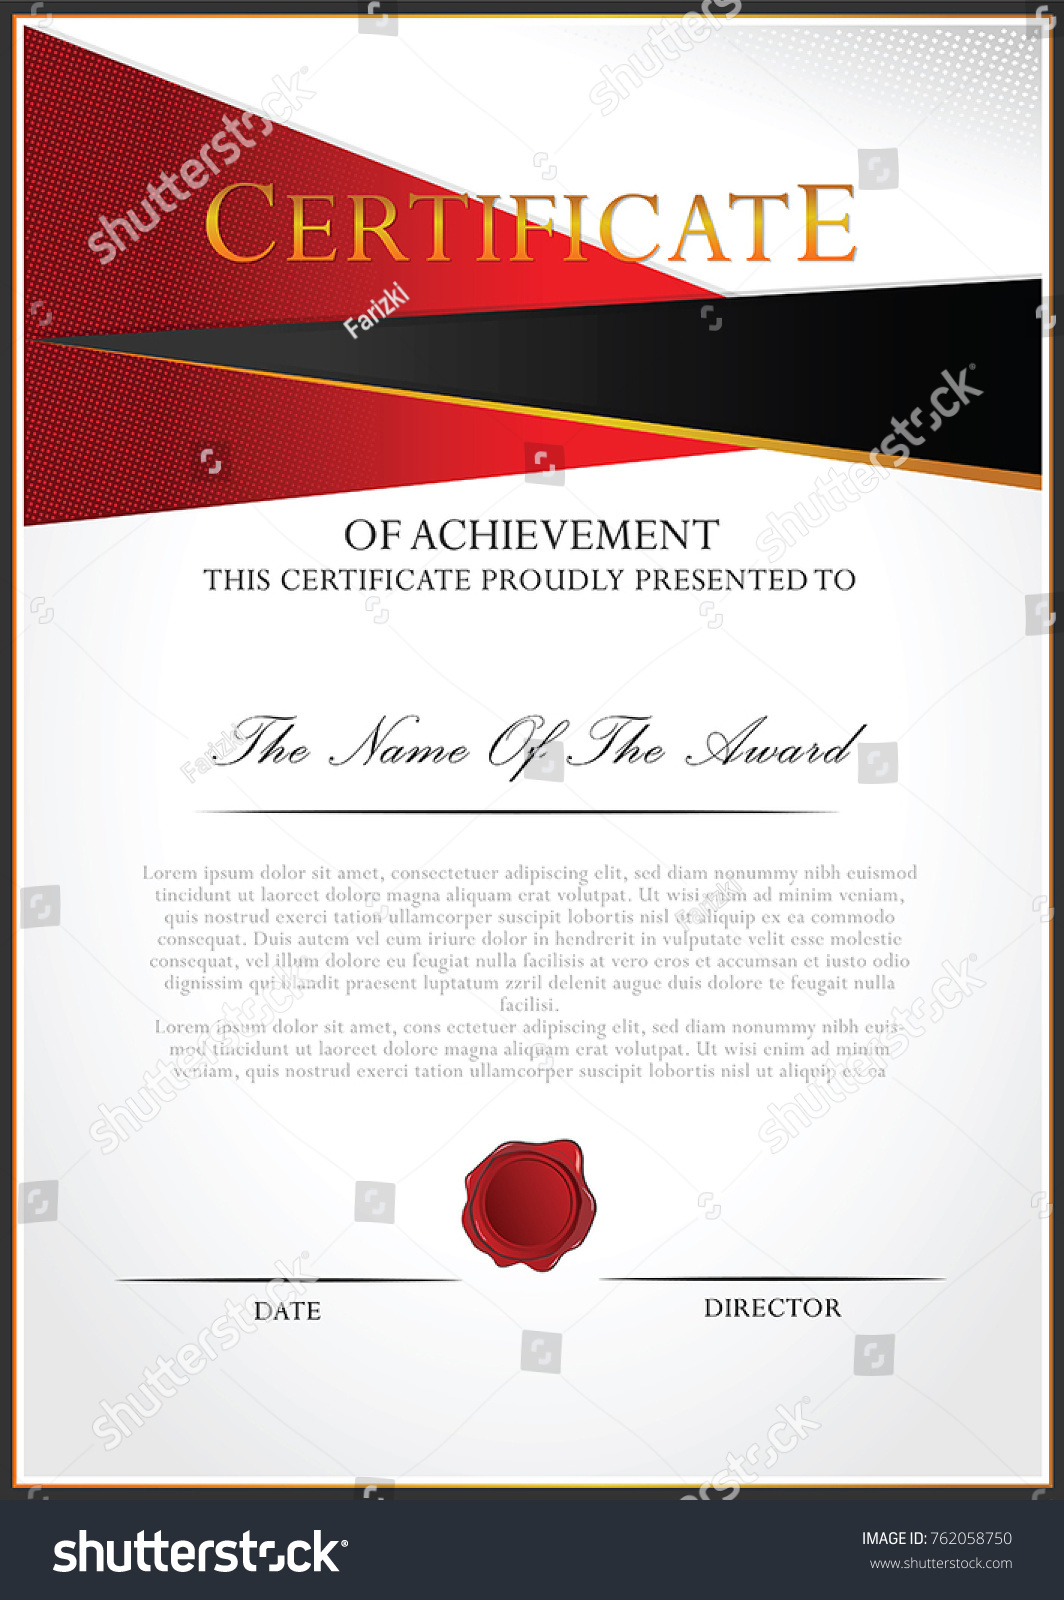 Certificate template with halftone dots background #762058750